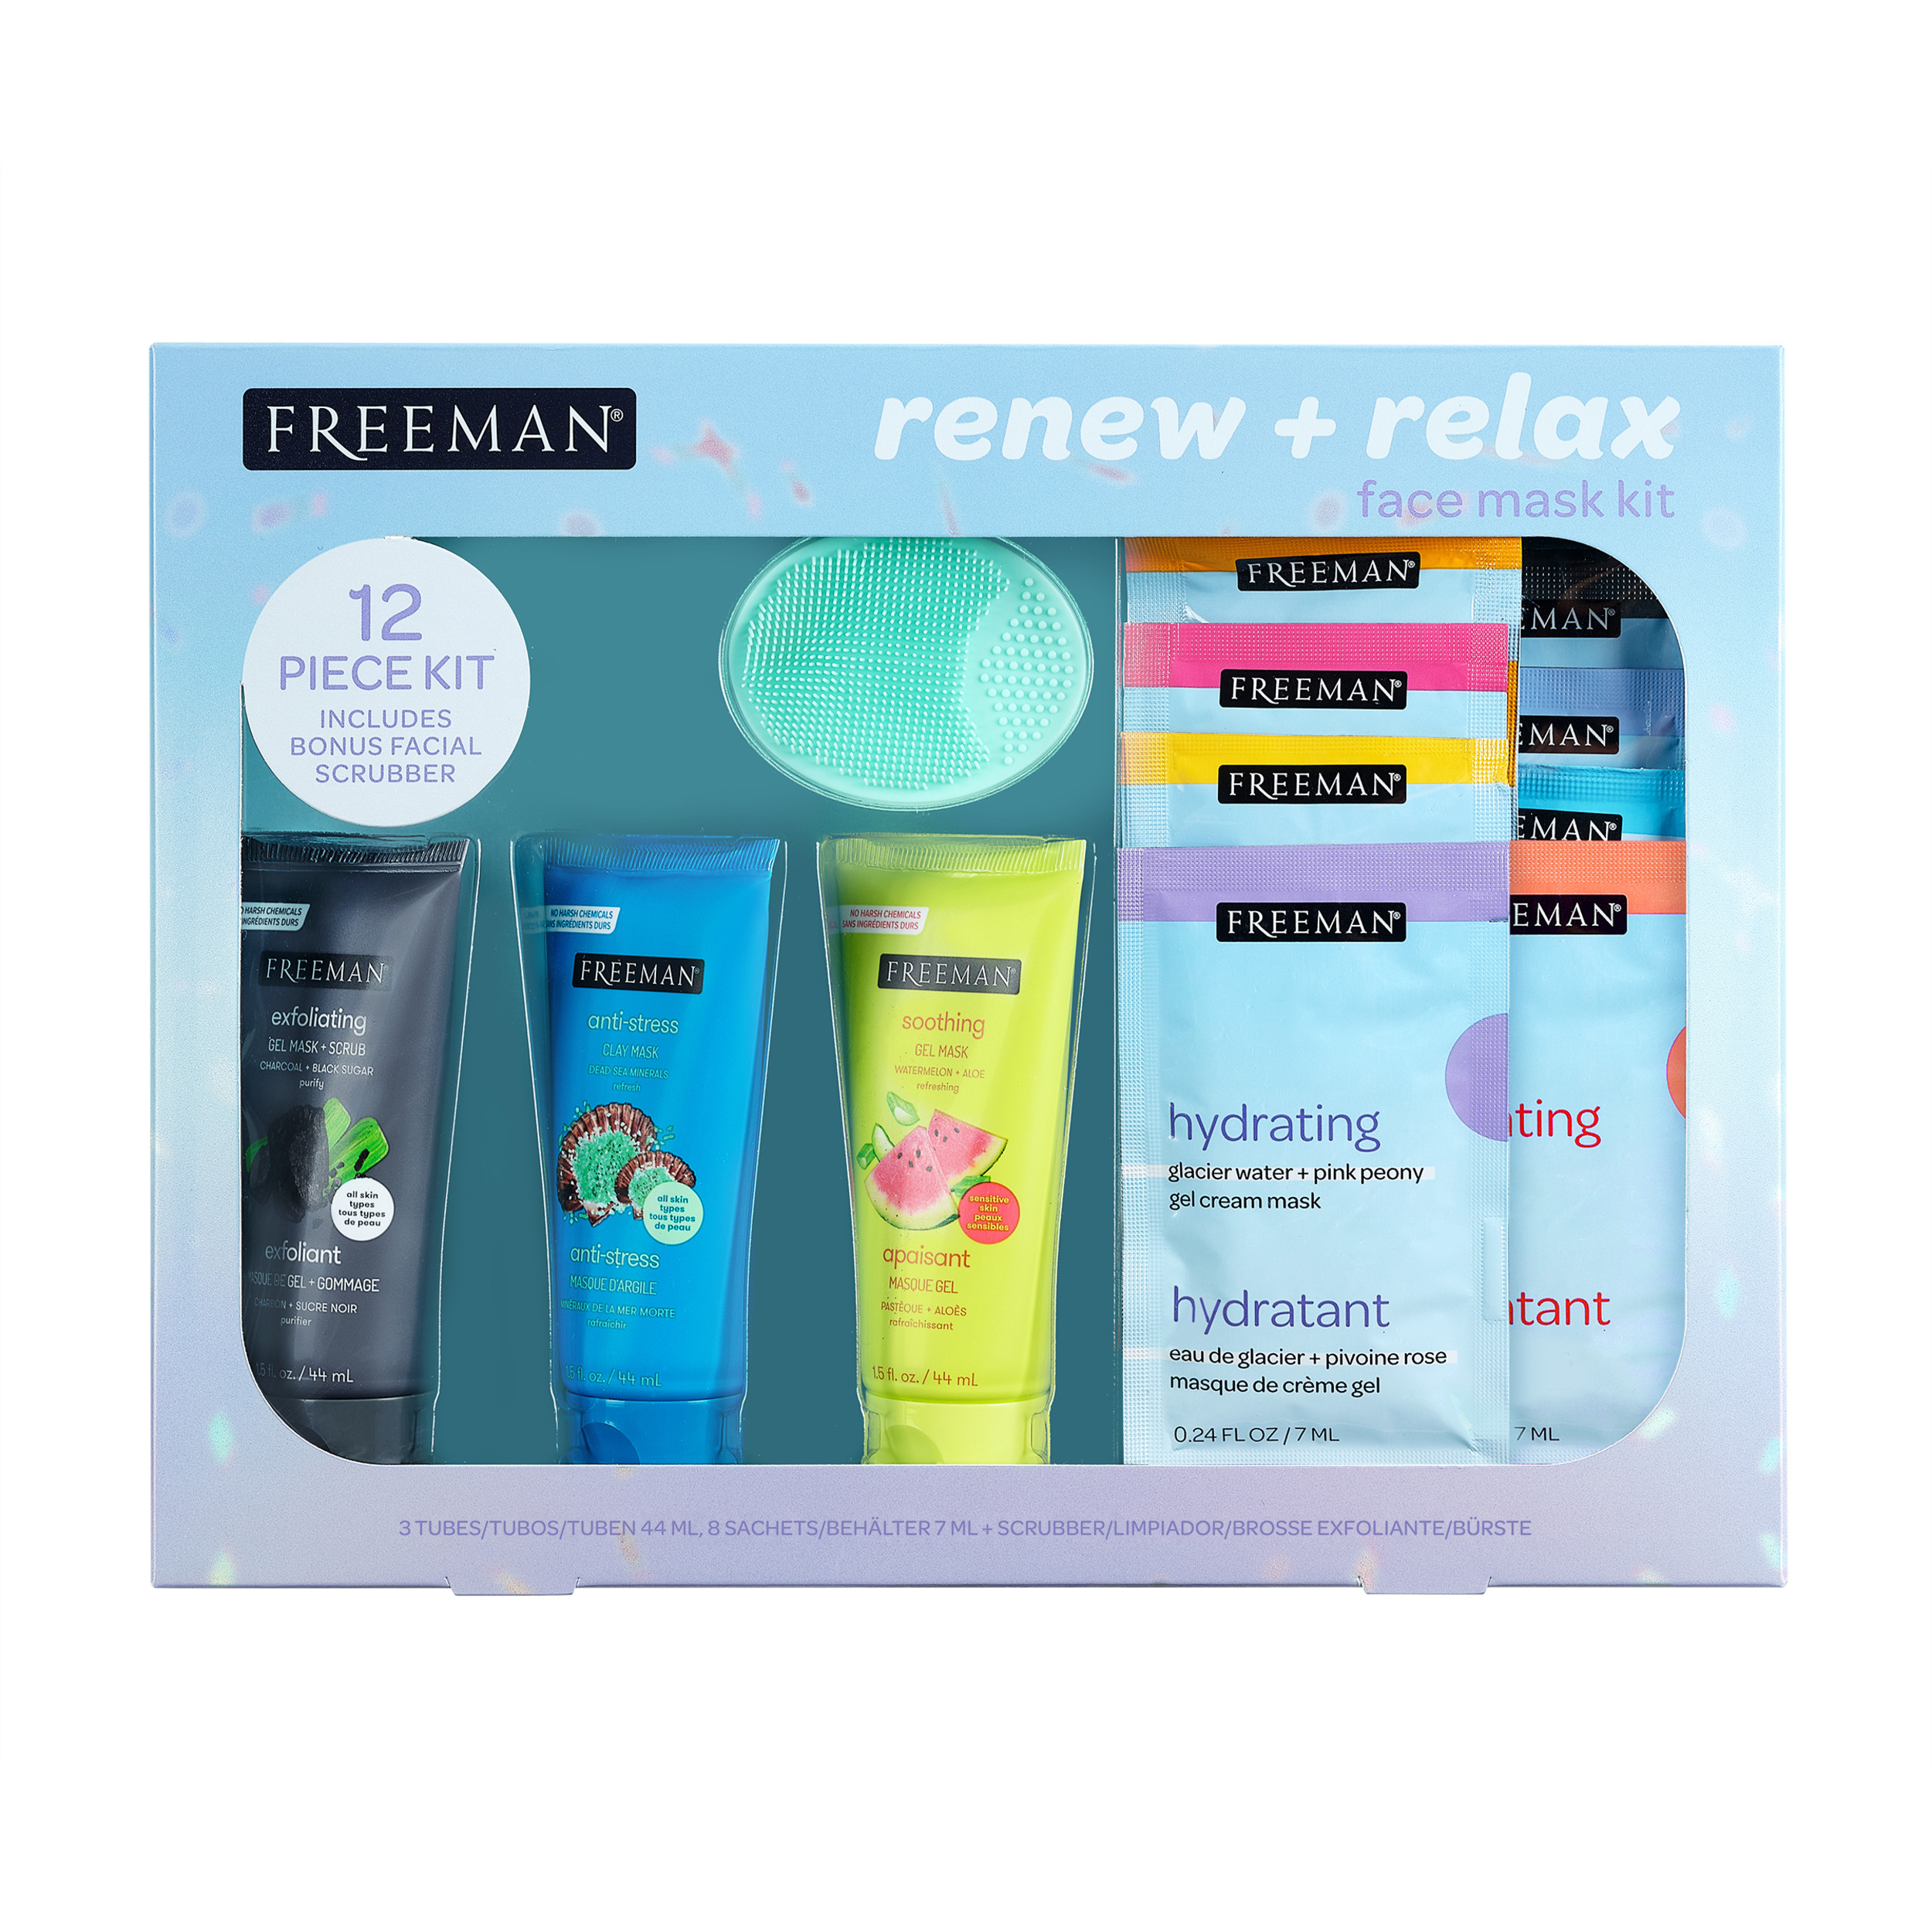 Freeman Limited Edition Renew & Relax Facial Mask Kit, 12 Piece Gift Set - image 1 of 24